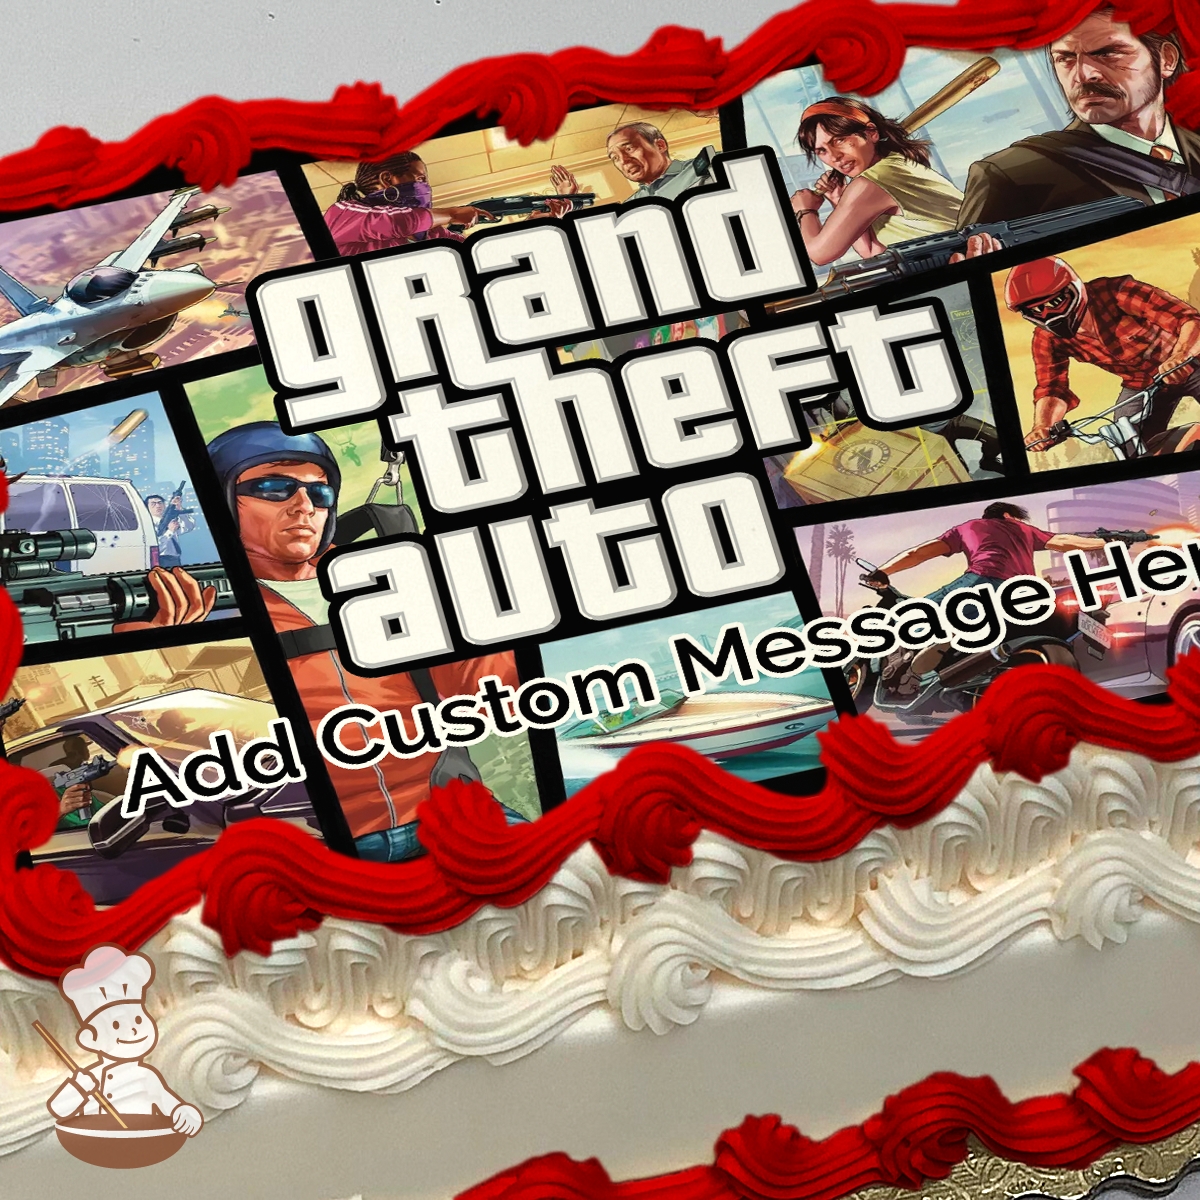 Grand Theft Auto printed on extra cake layer and decorated on rectangle sheet cake.